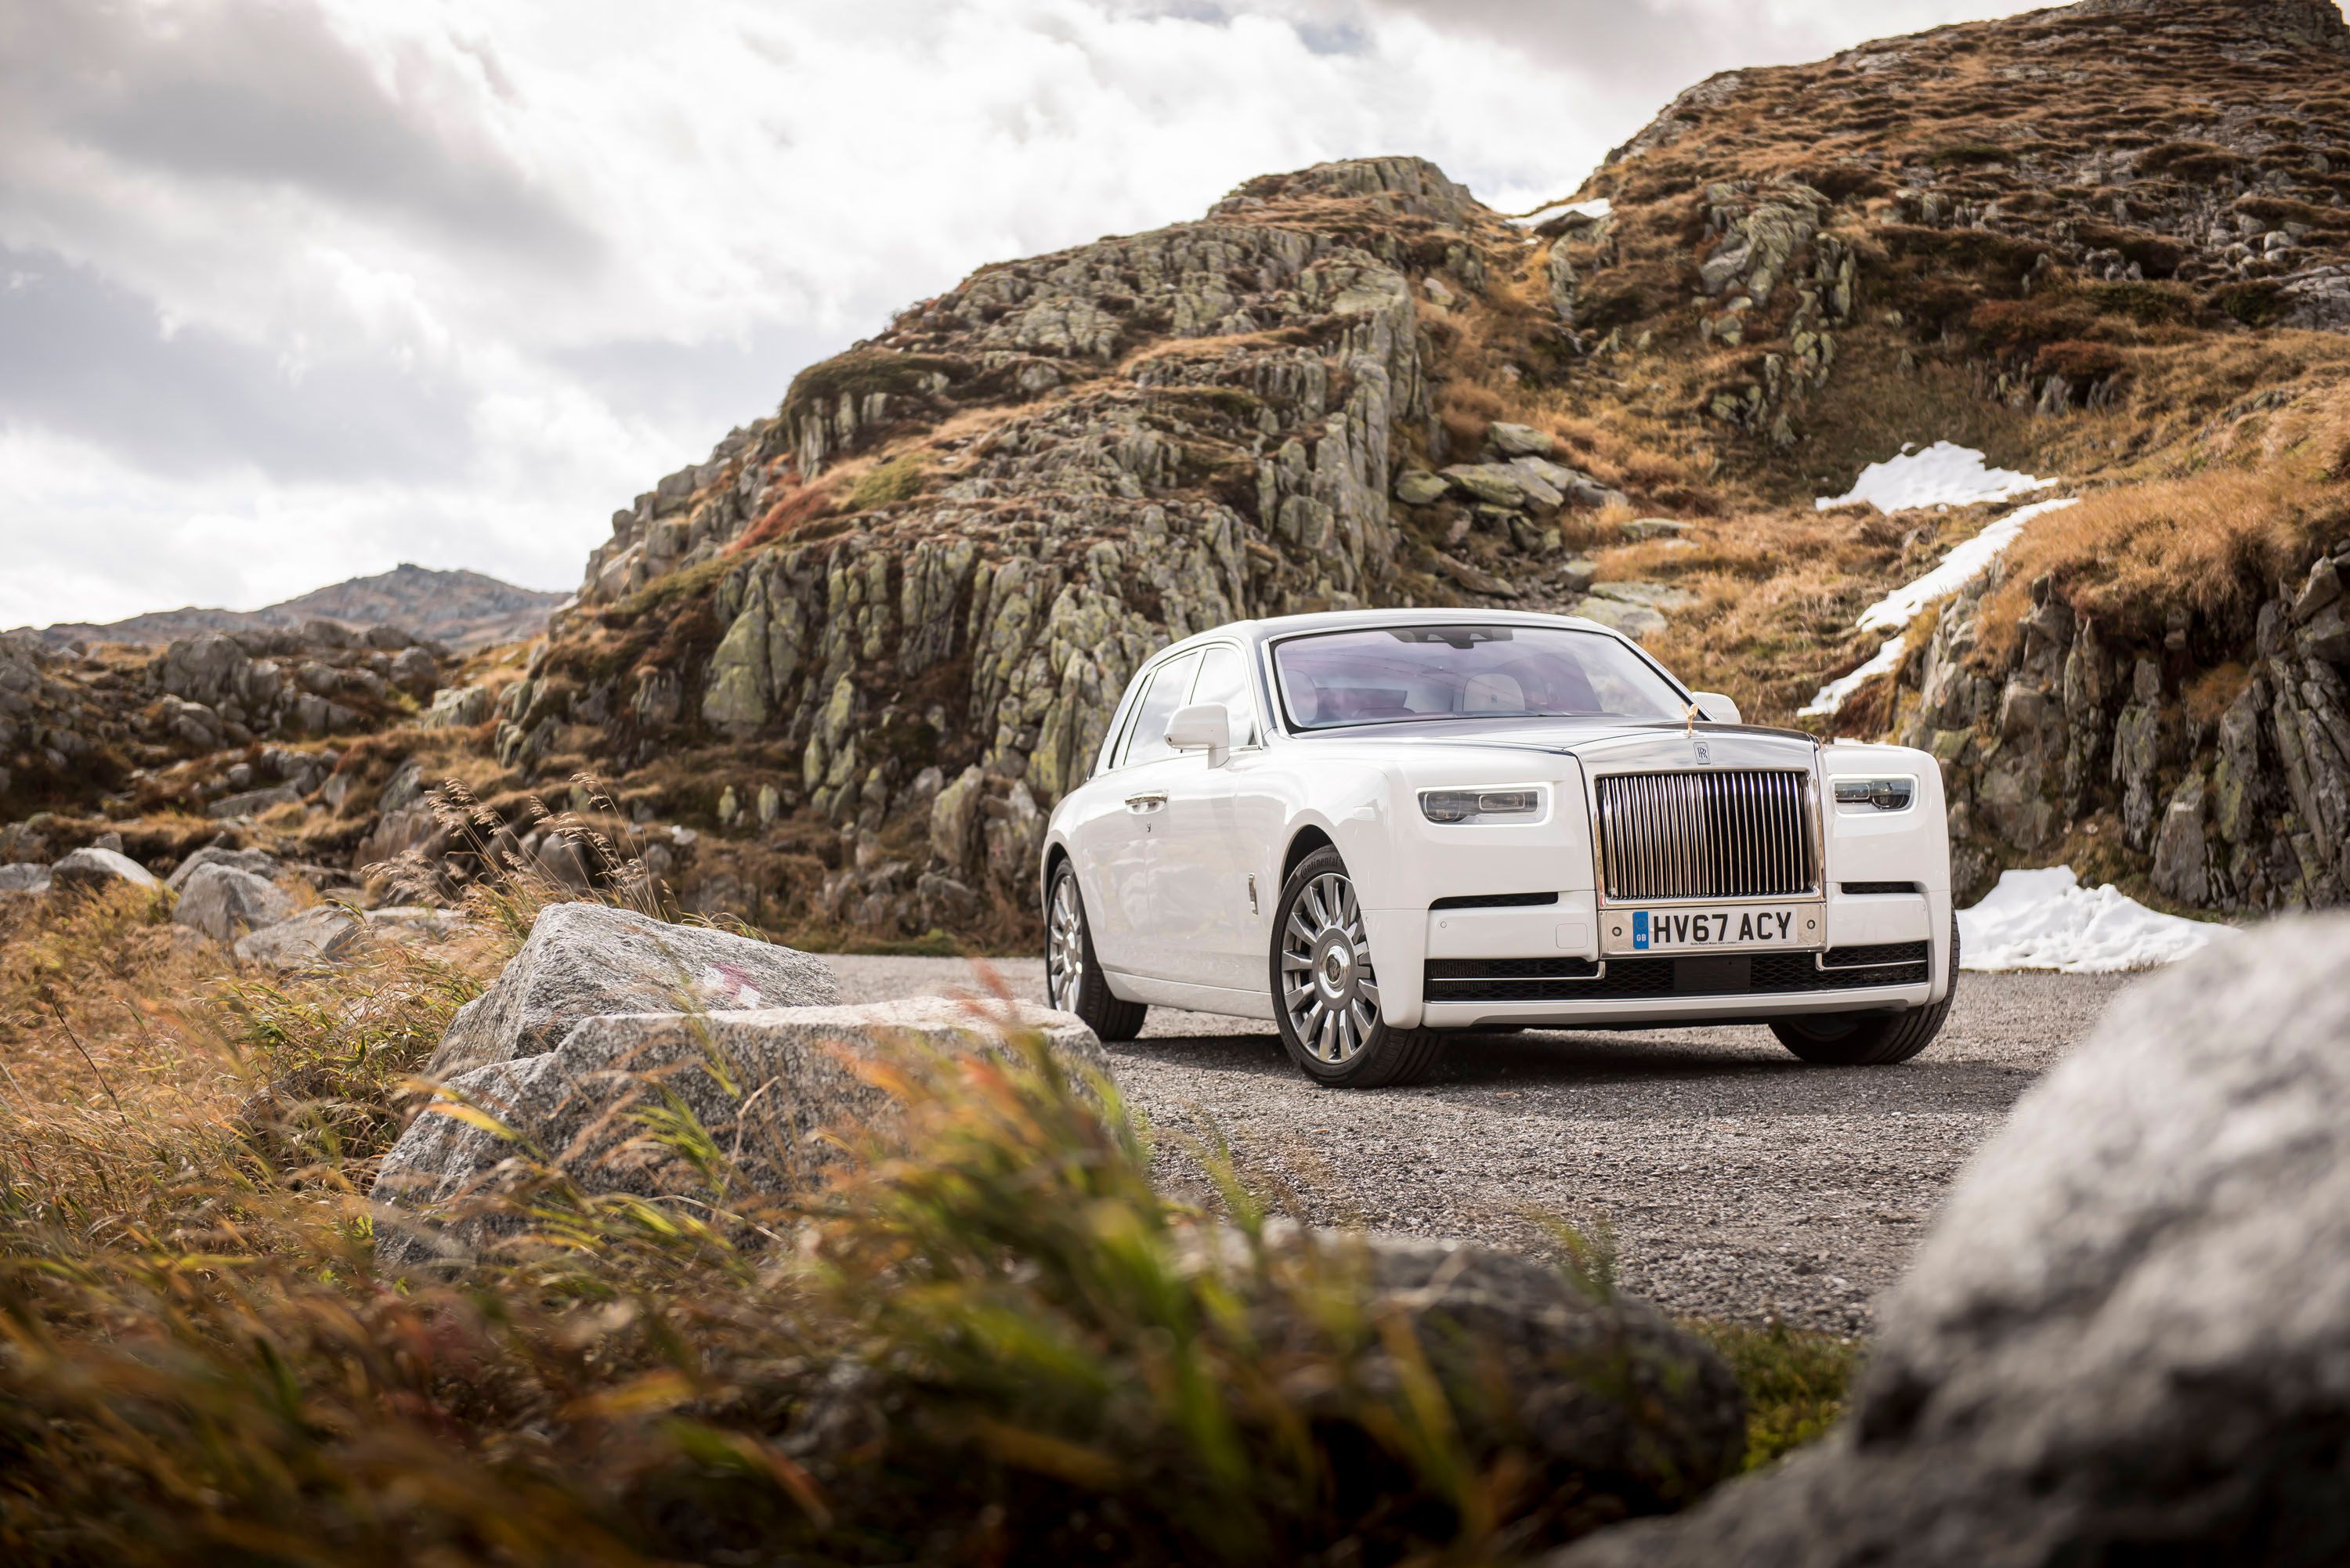 Rolls-Royce Used Songs From Radiohead and Pink Floyd to Test Its Fancy ...